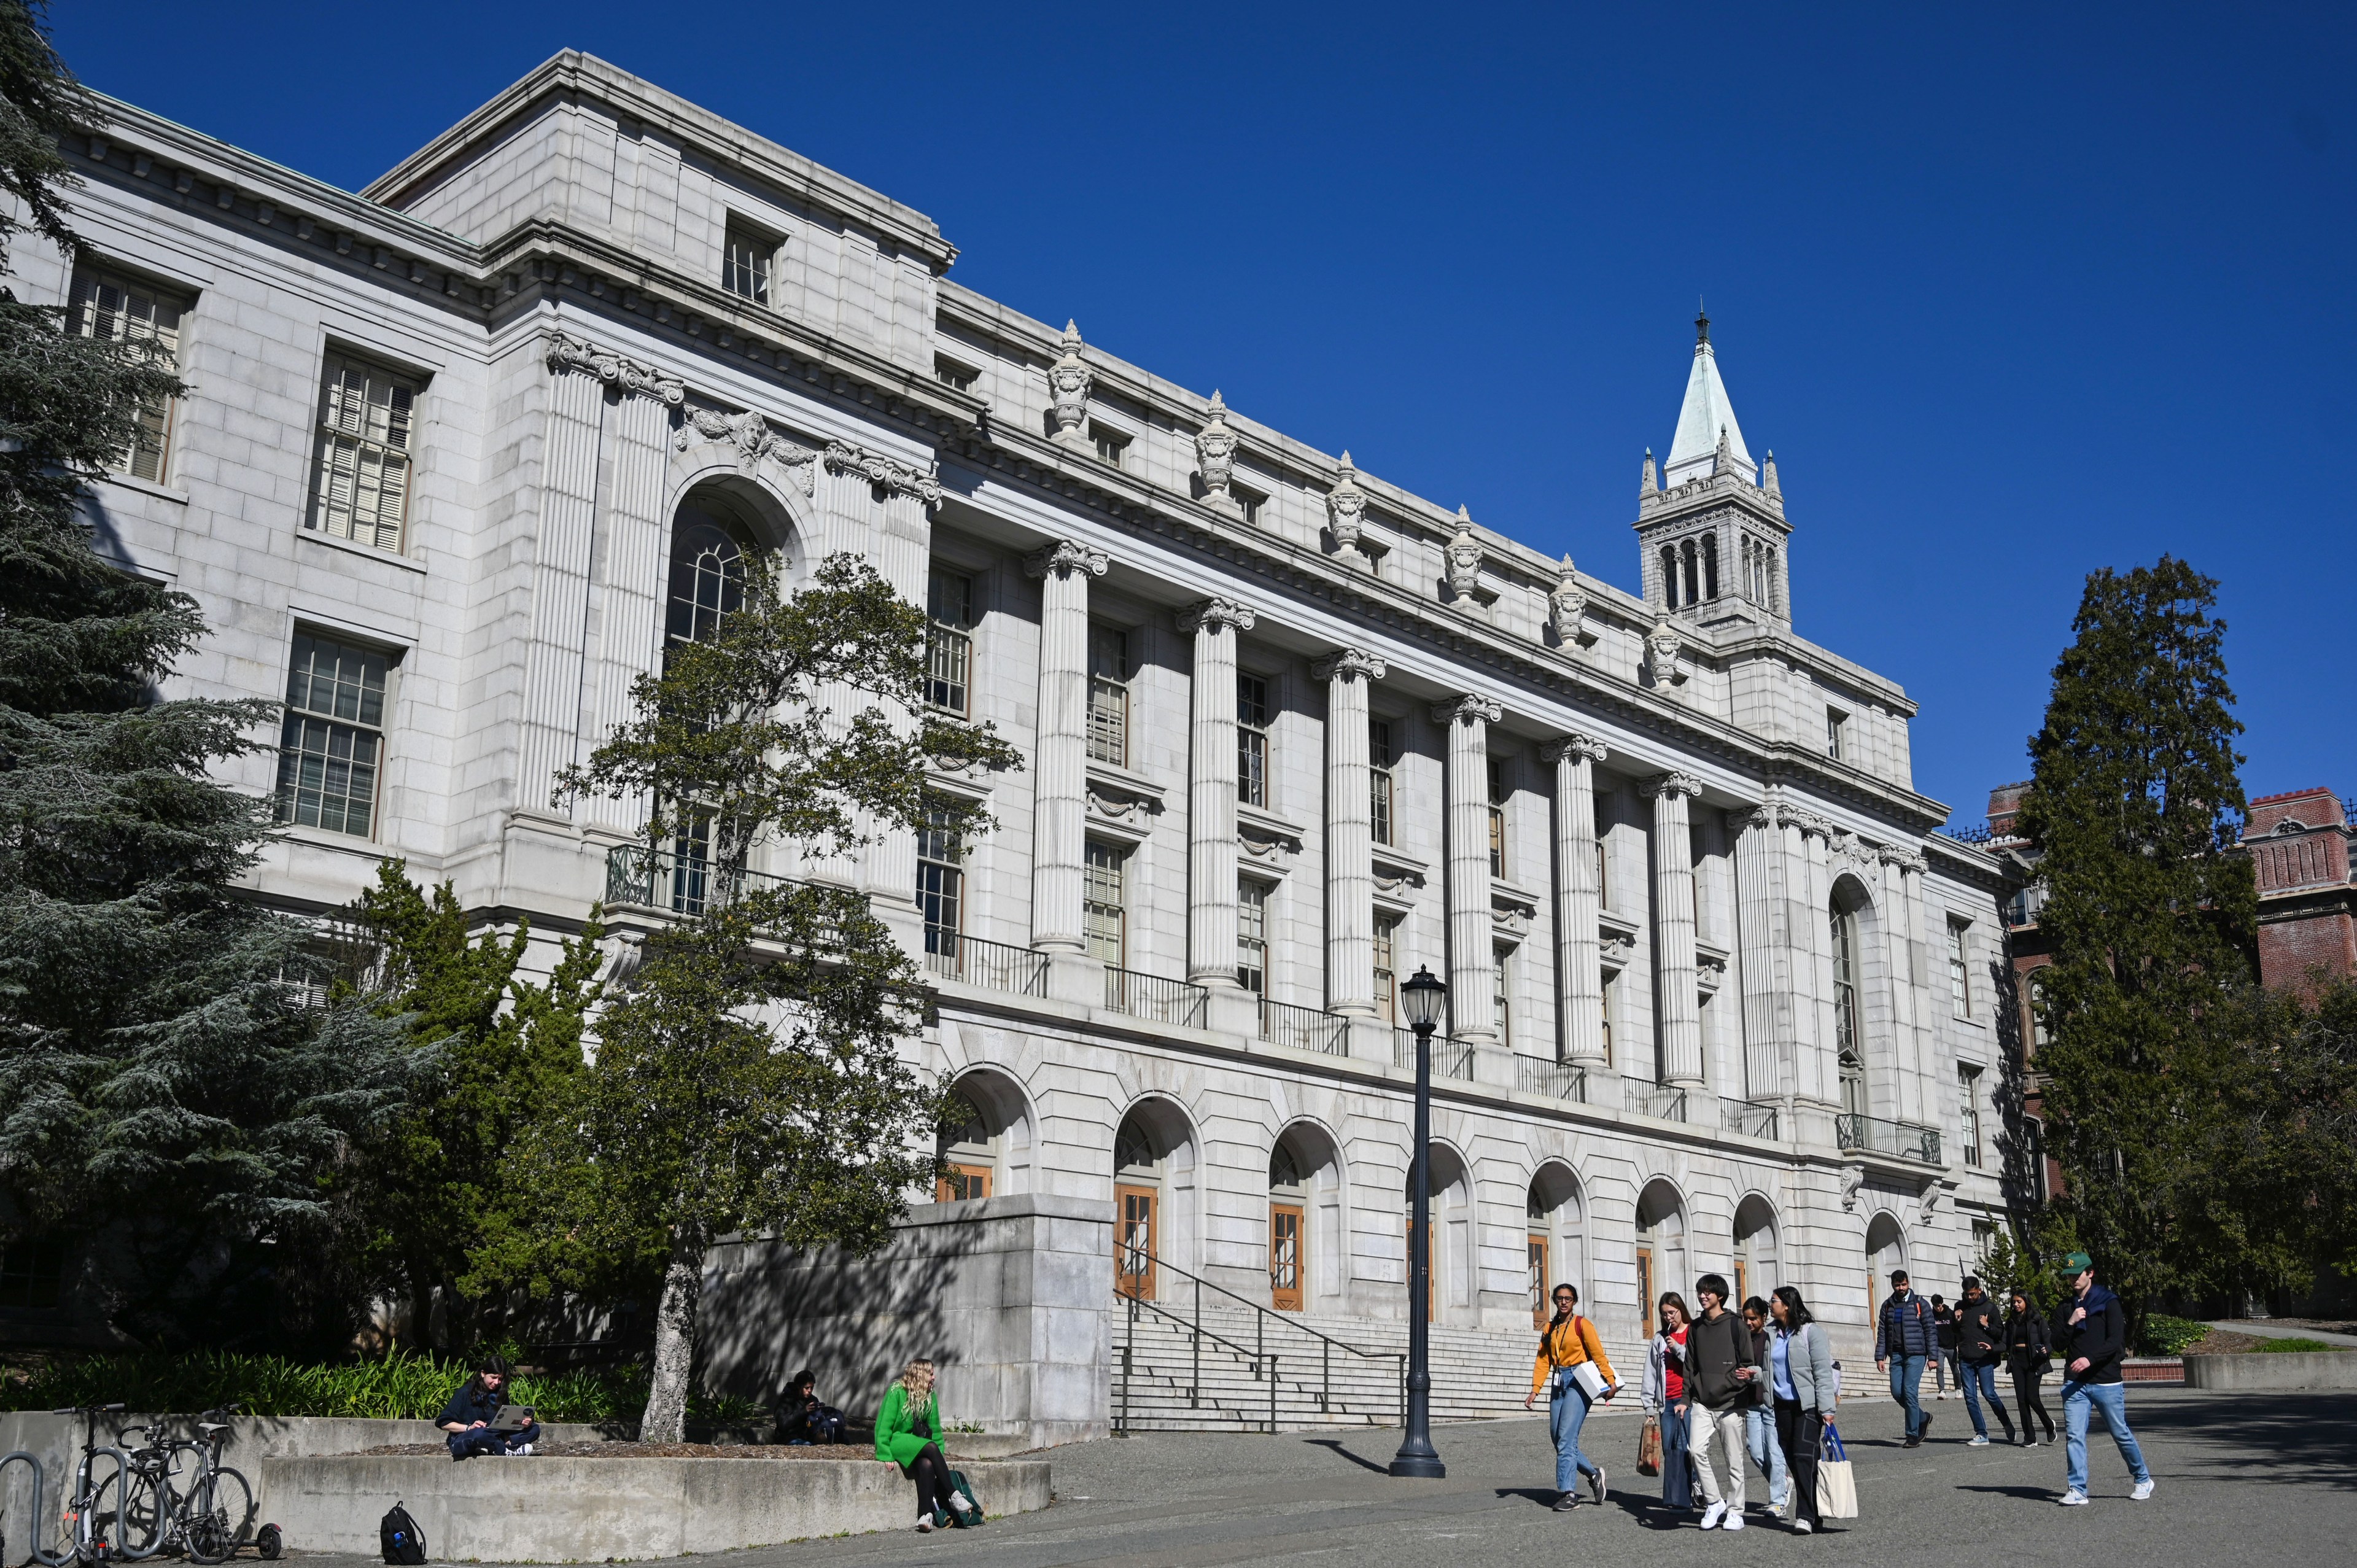 A group of people walk and sit near a large, white stone building with columns, arched doorways, tall windows, and a clock tower under a clear blue sky.